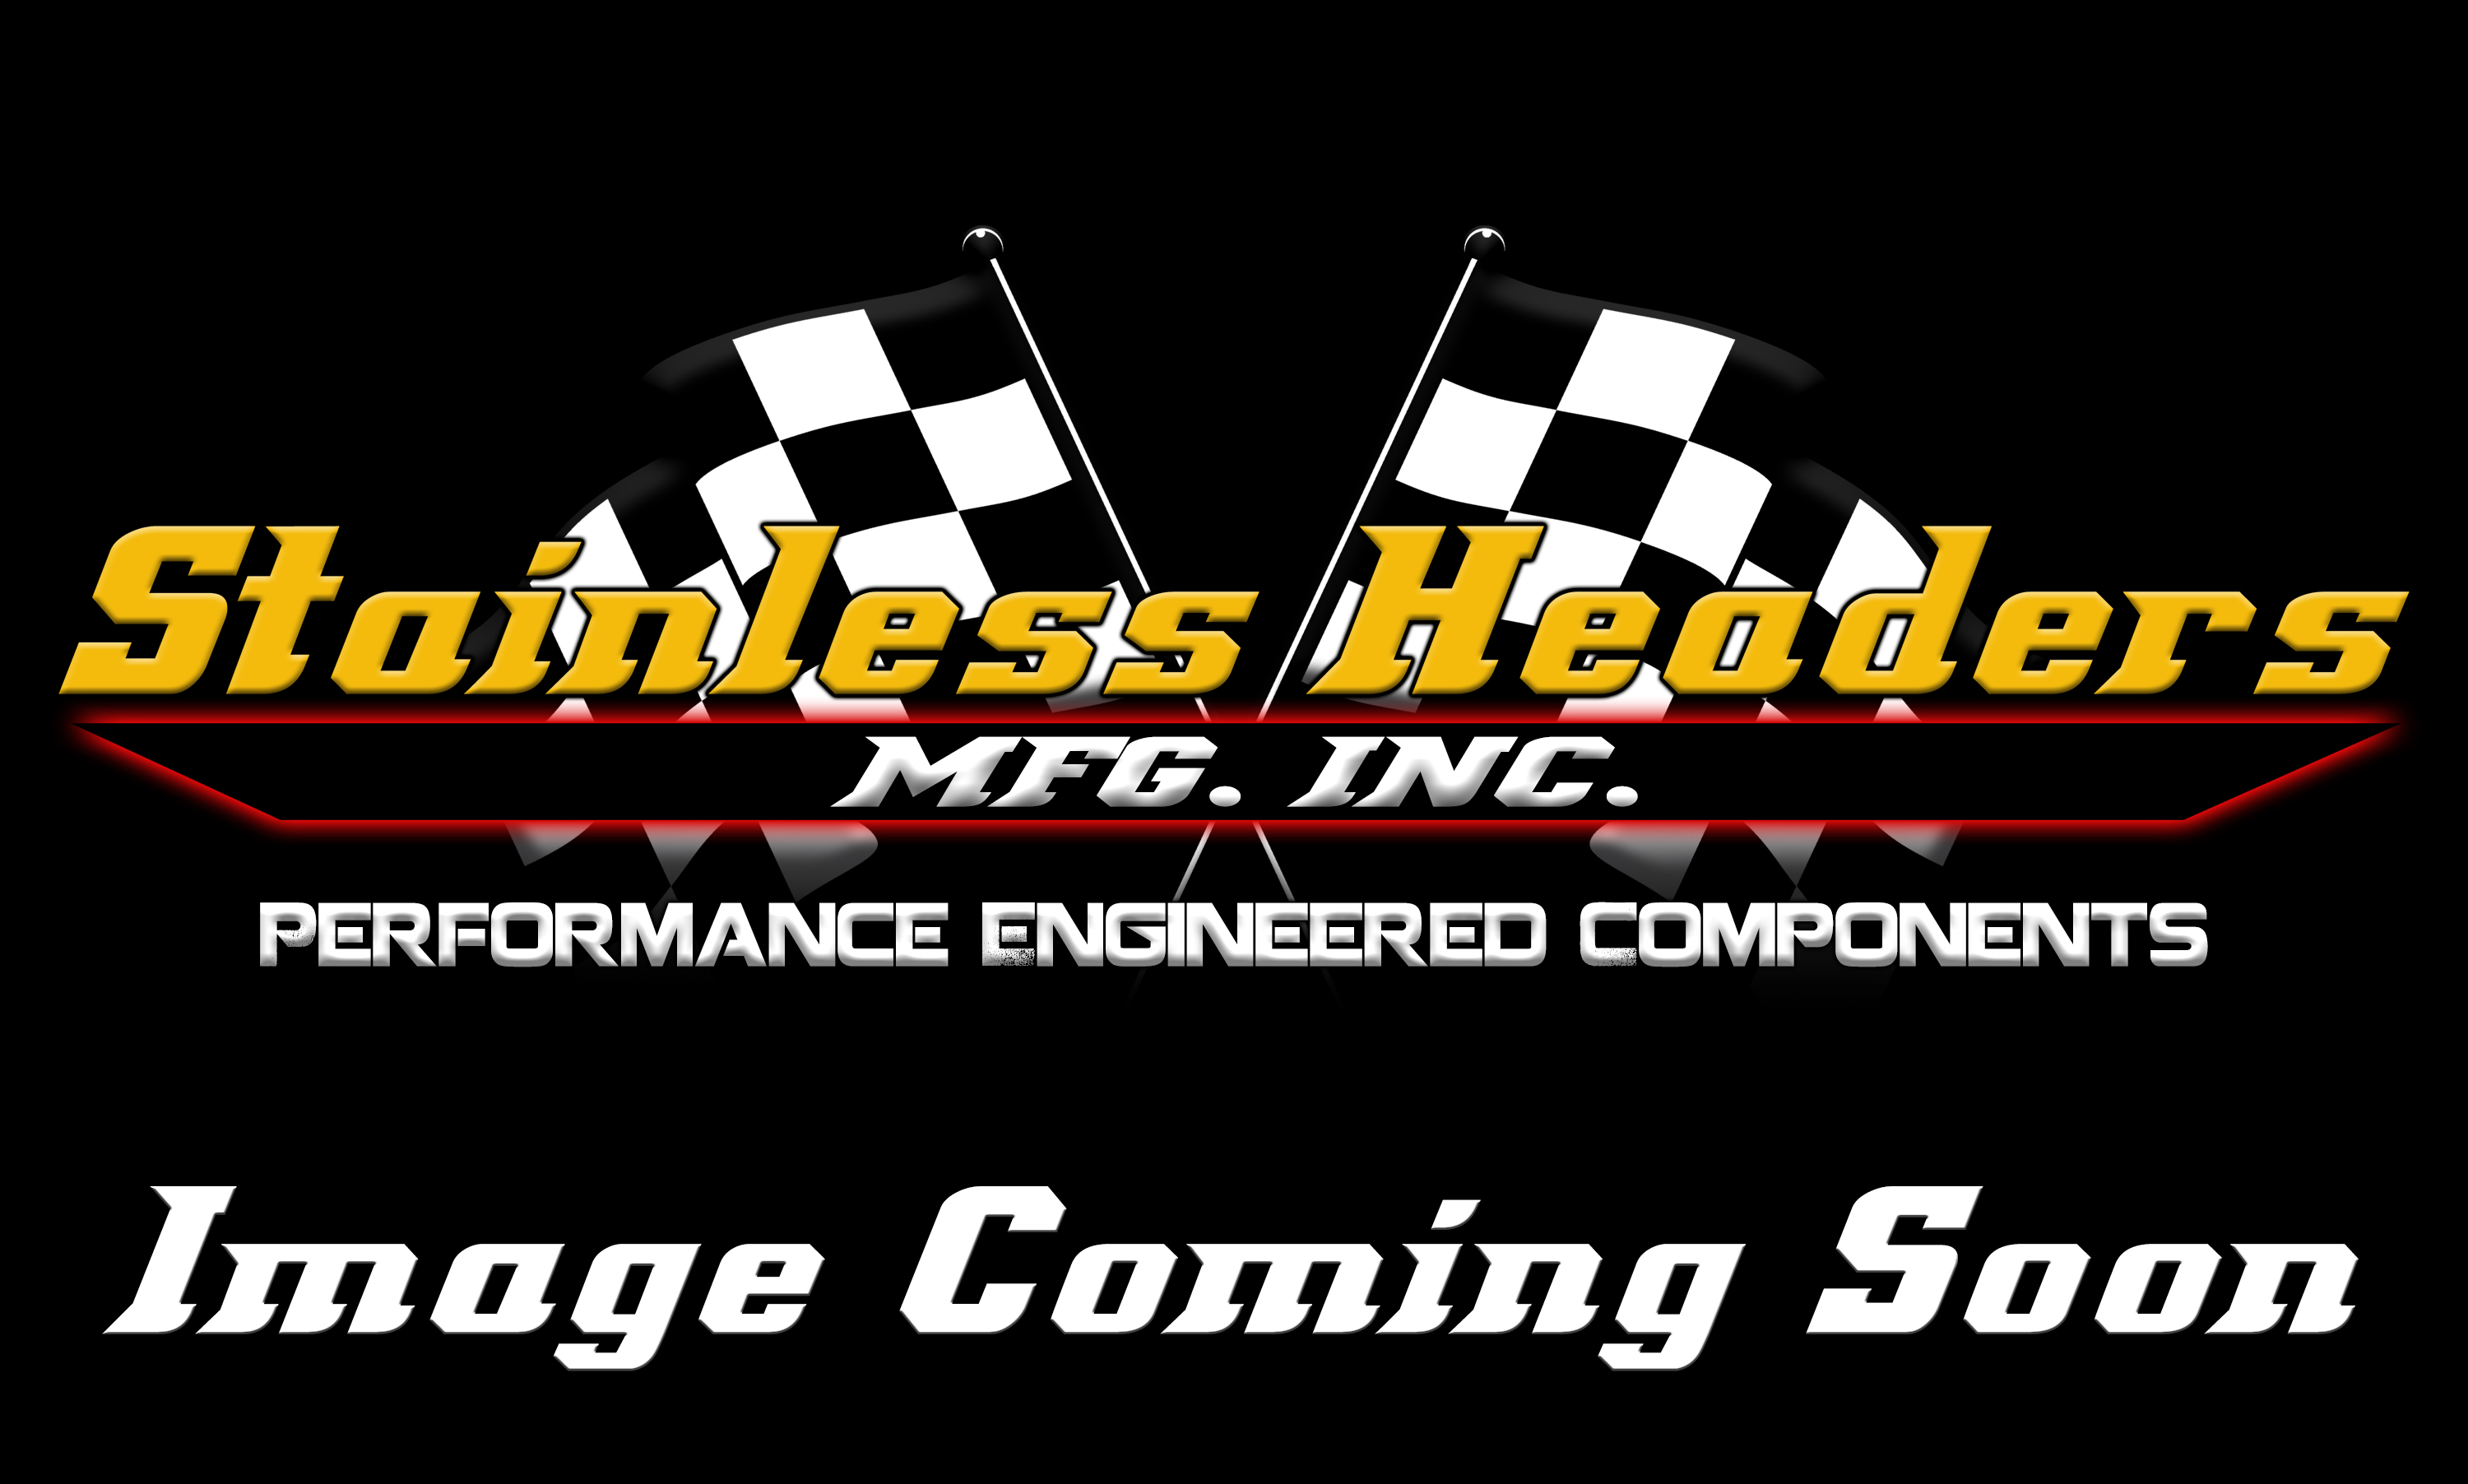 CompTurbo Technologies - CTR3693S-6265 Reverse Rotation Oil-Less 3.0 Turbocharger (825 HP)